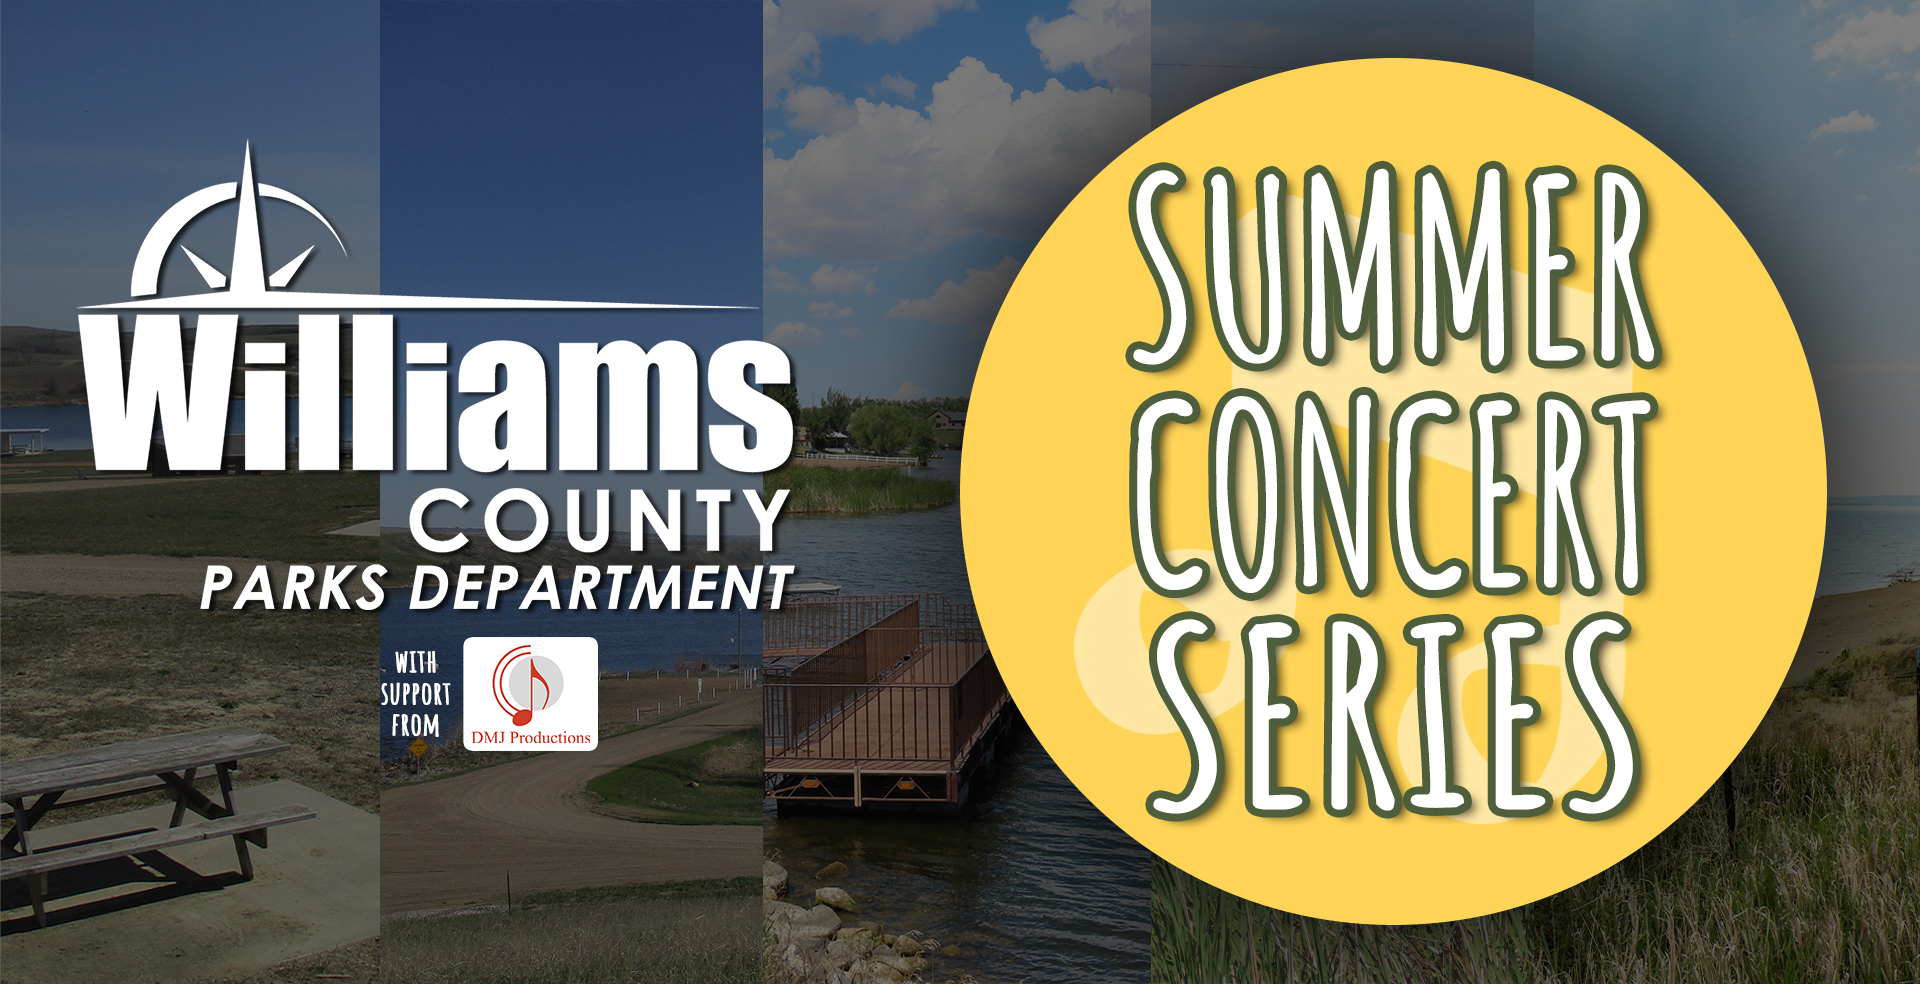 Williams County Parks Department Summer Concert Series